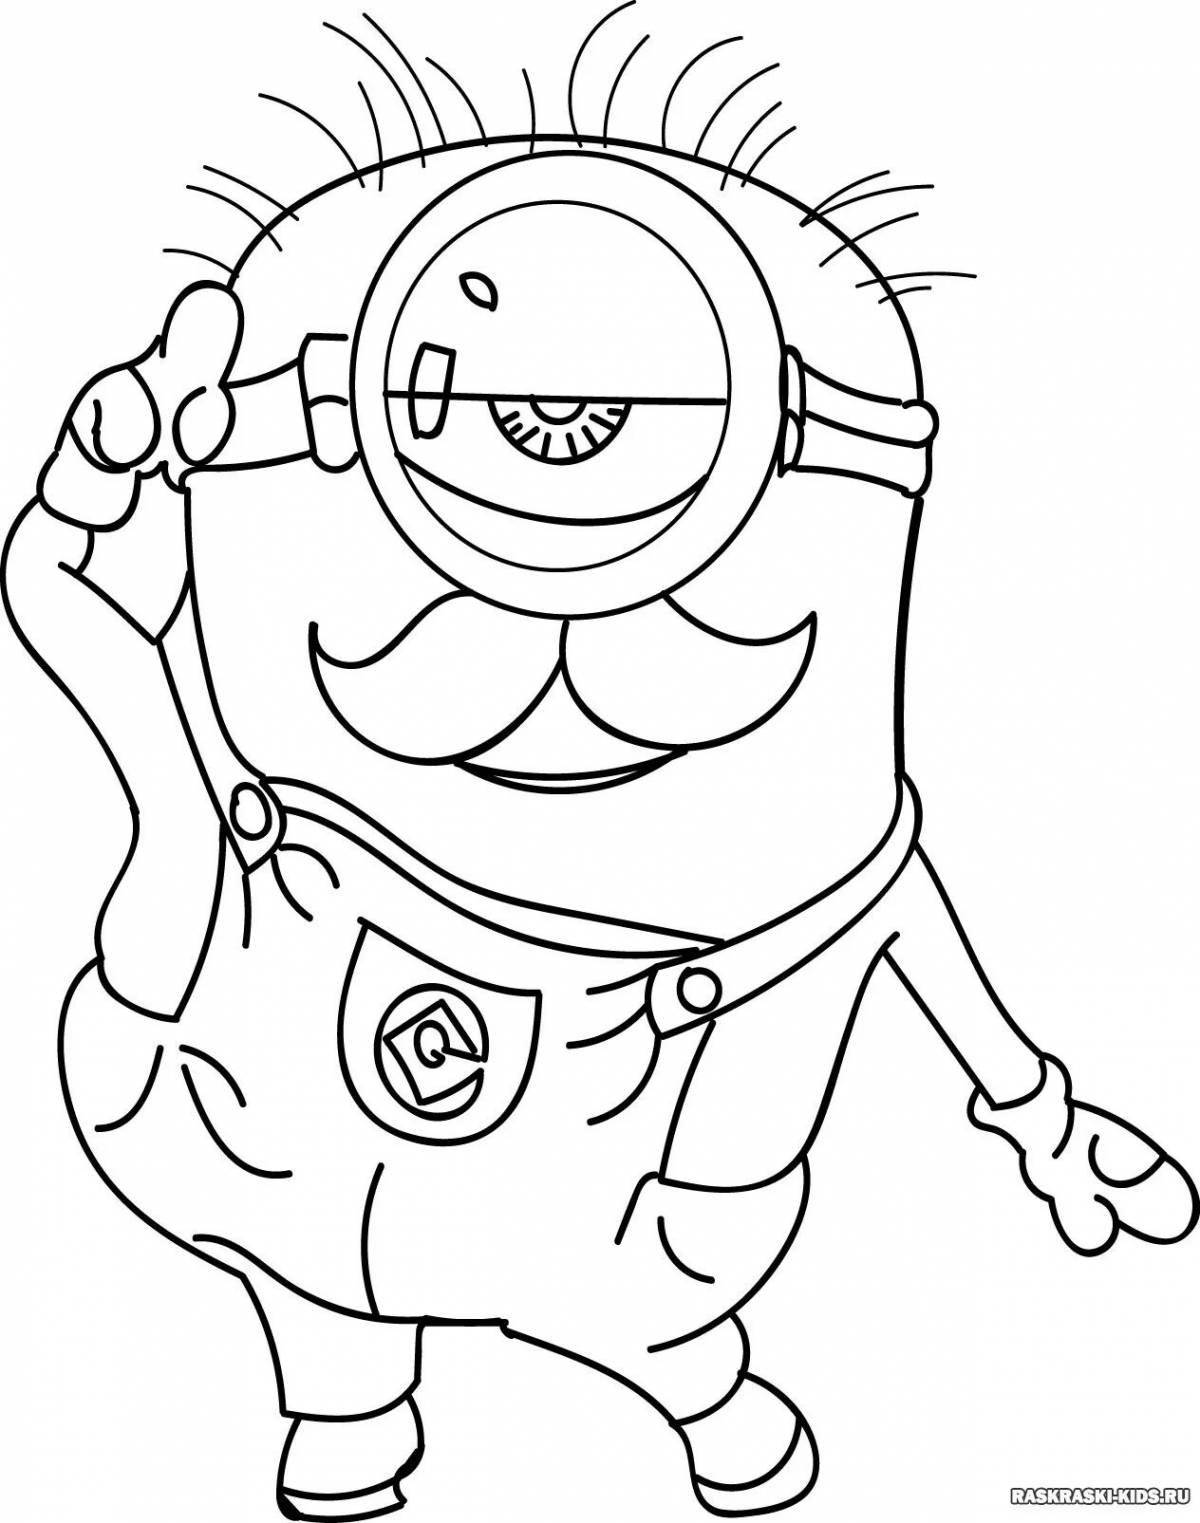 Cute minion coloring book for kids